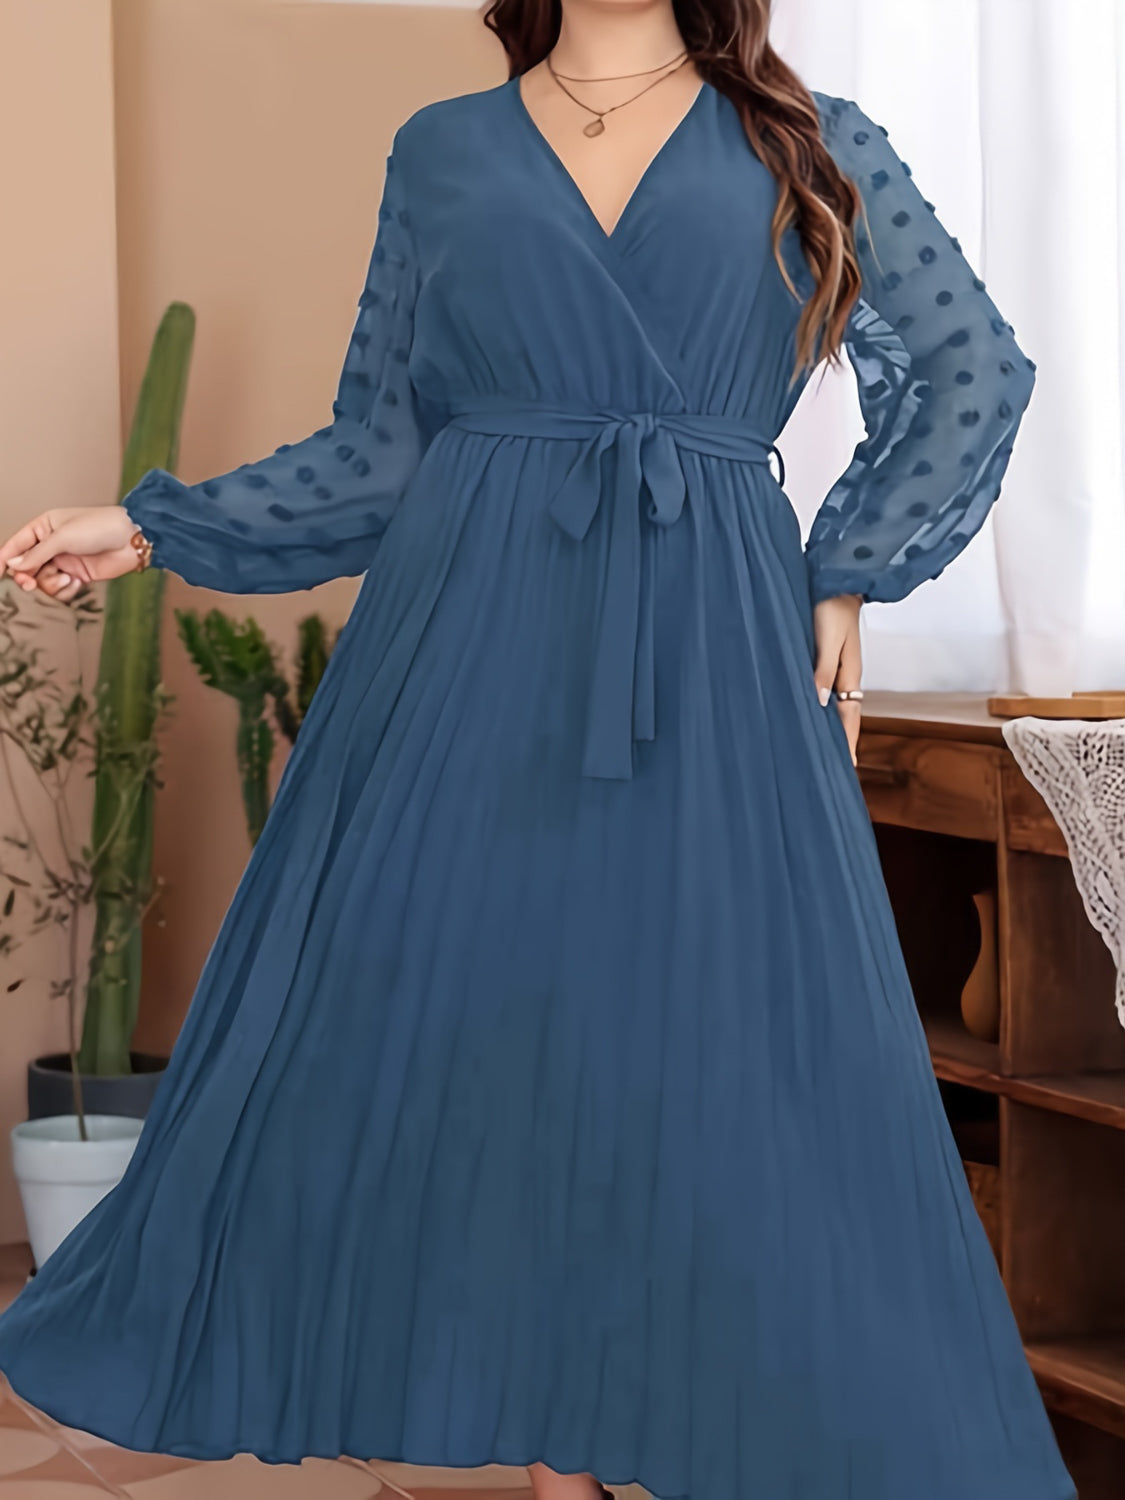 Elegant Plus Size Swiss Dot Tie Waist Maxi Dress for Beach Wedding Guests - Perfect Fit for Plus Size Beach Wedding Attire and Comfortable Style.